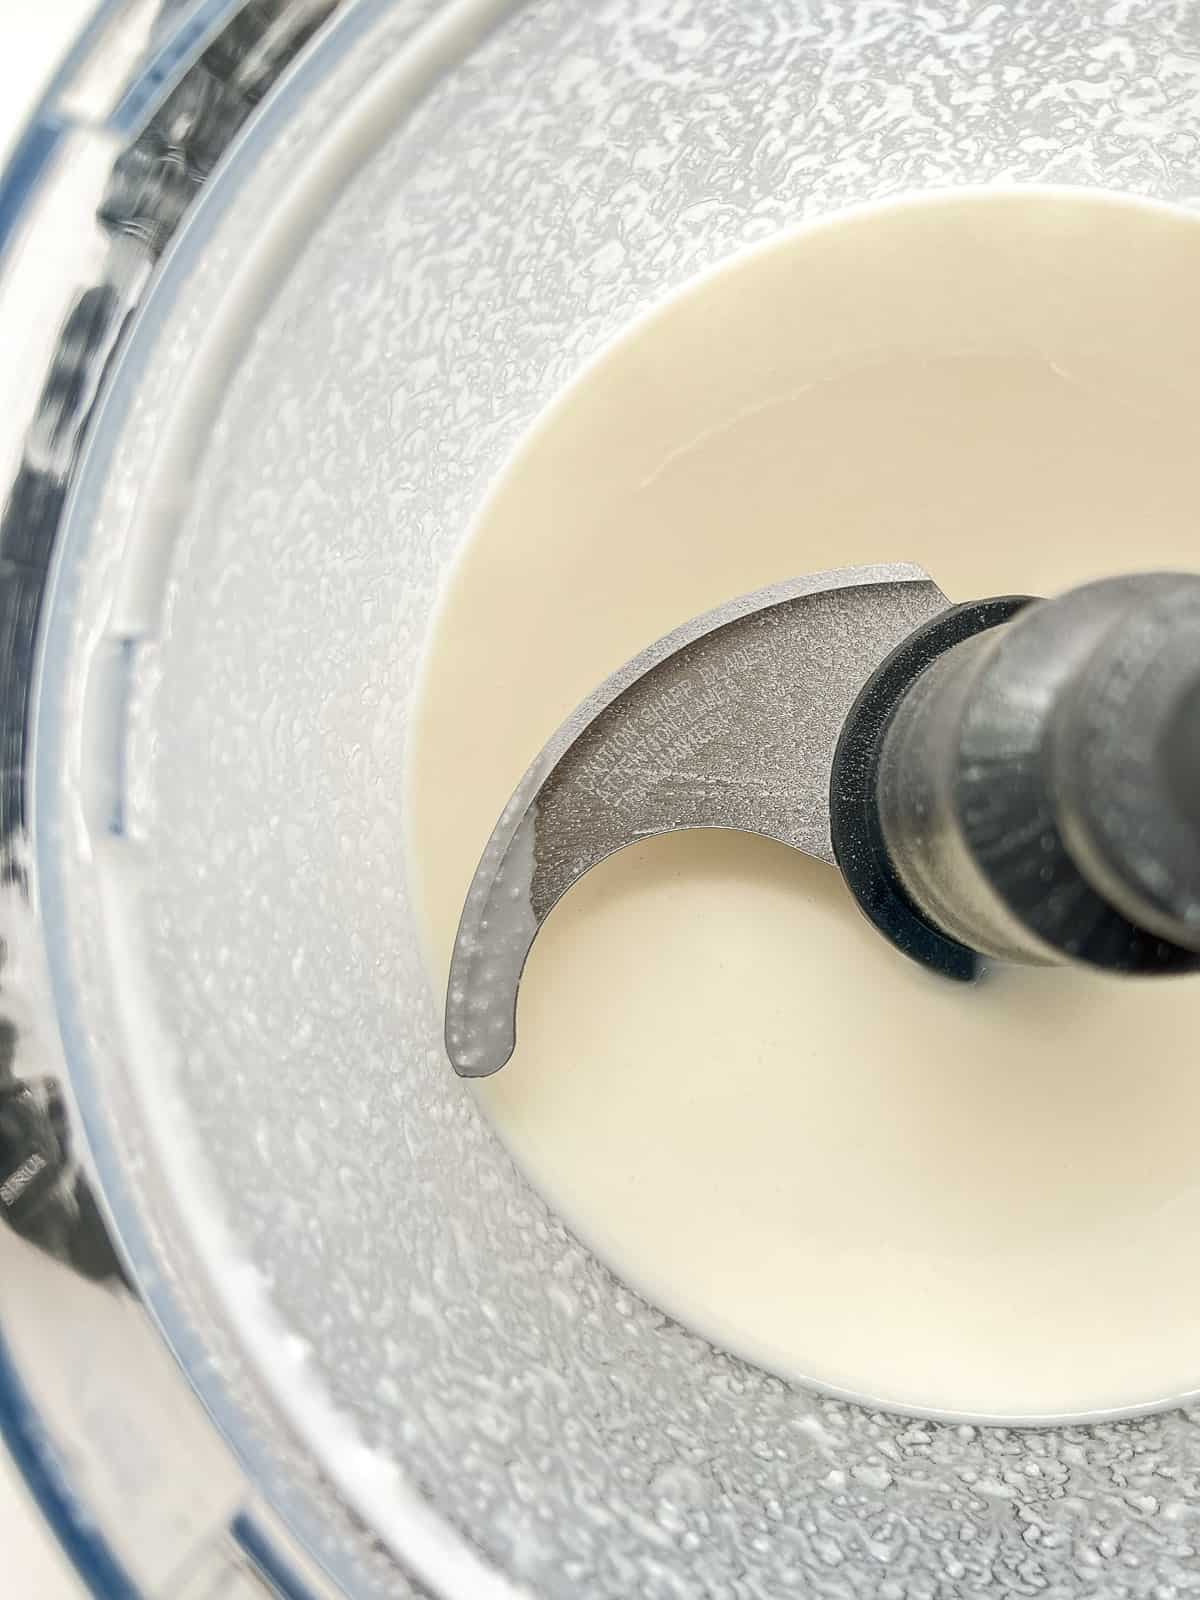 An image of coconut butter in its liquid state after it has been processed.